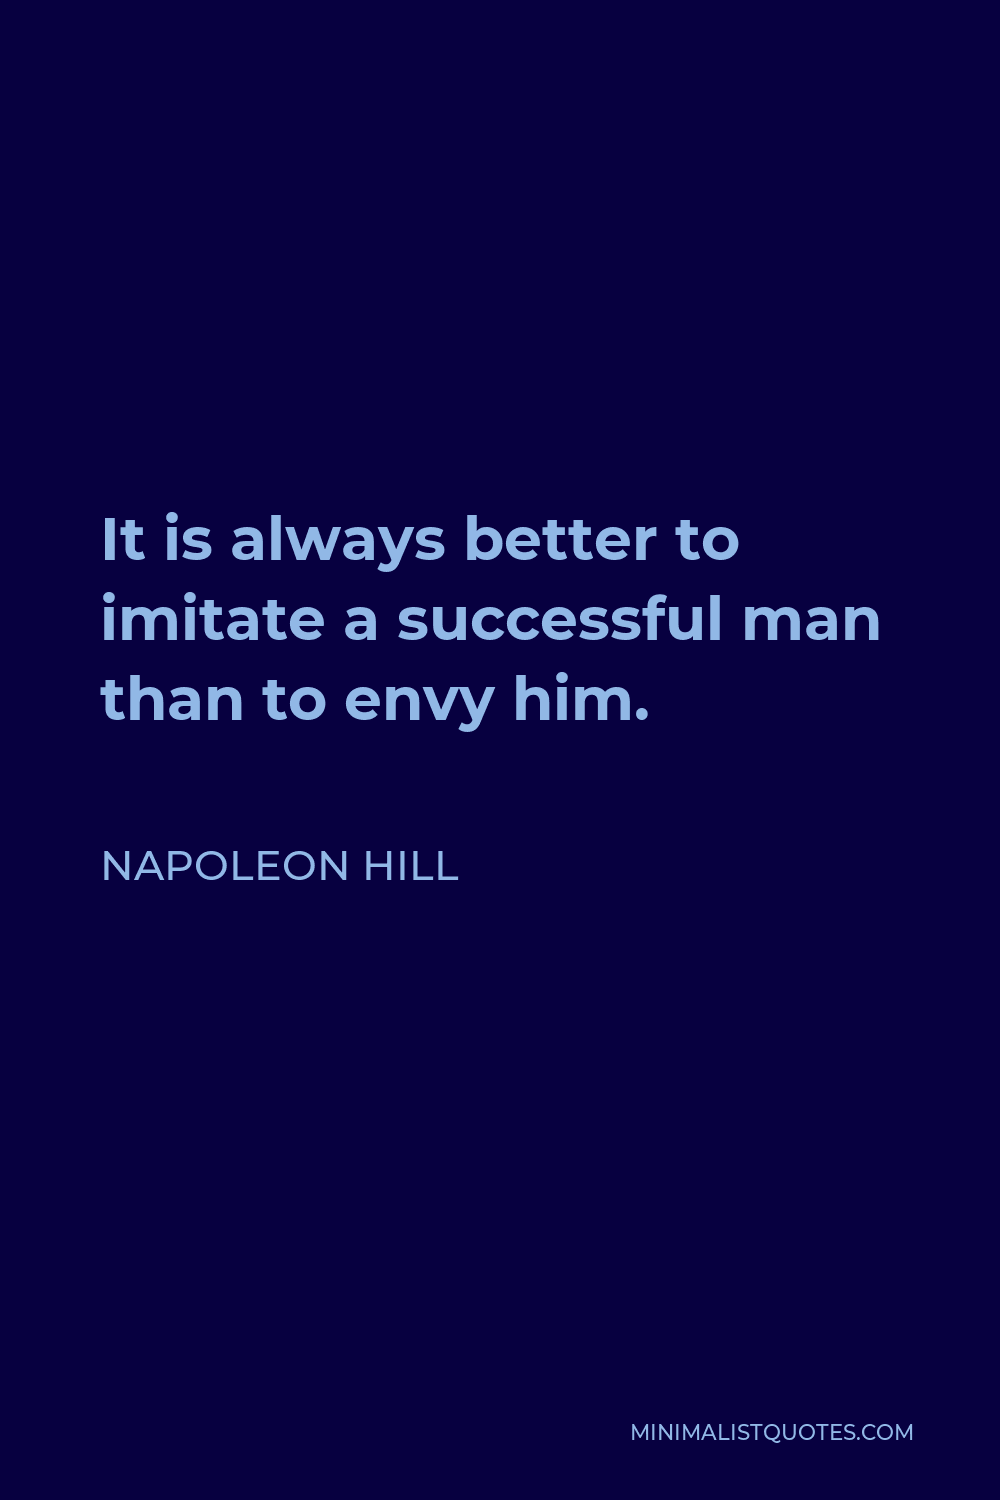 Napoleon Hill Quote - It is always better to imitate a successful man than to envy him.